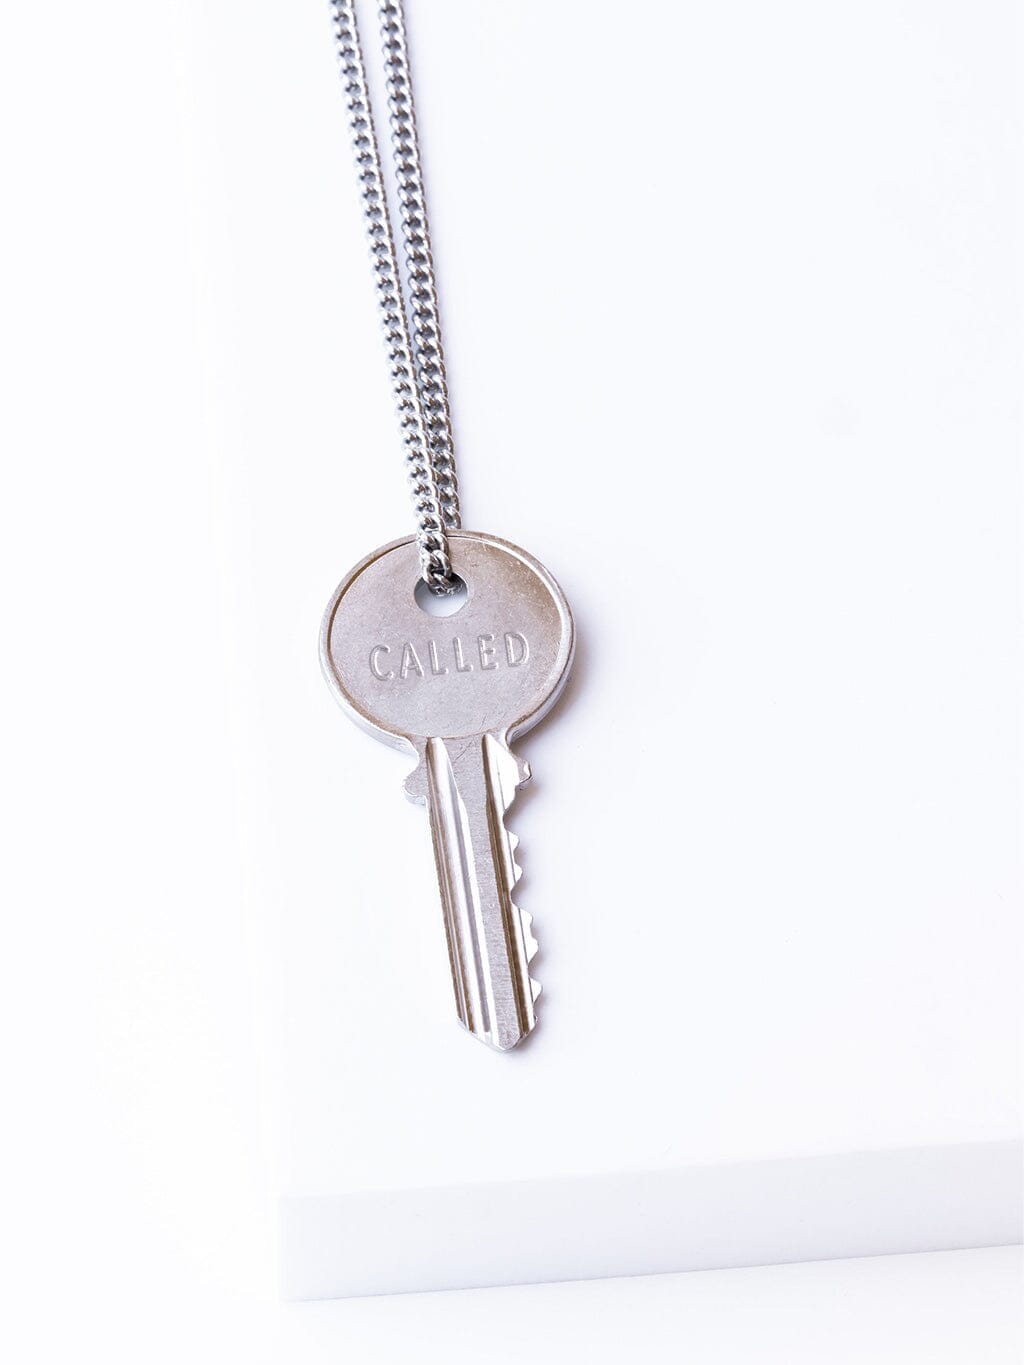 N - Spiritual Classic Key Necklace Necklaces The Giving Keys 